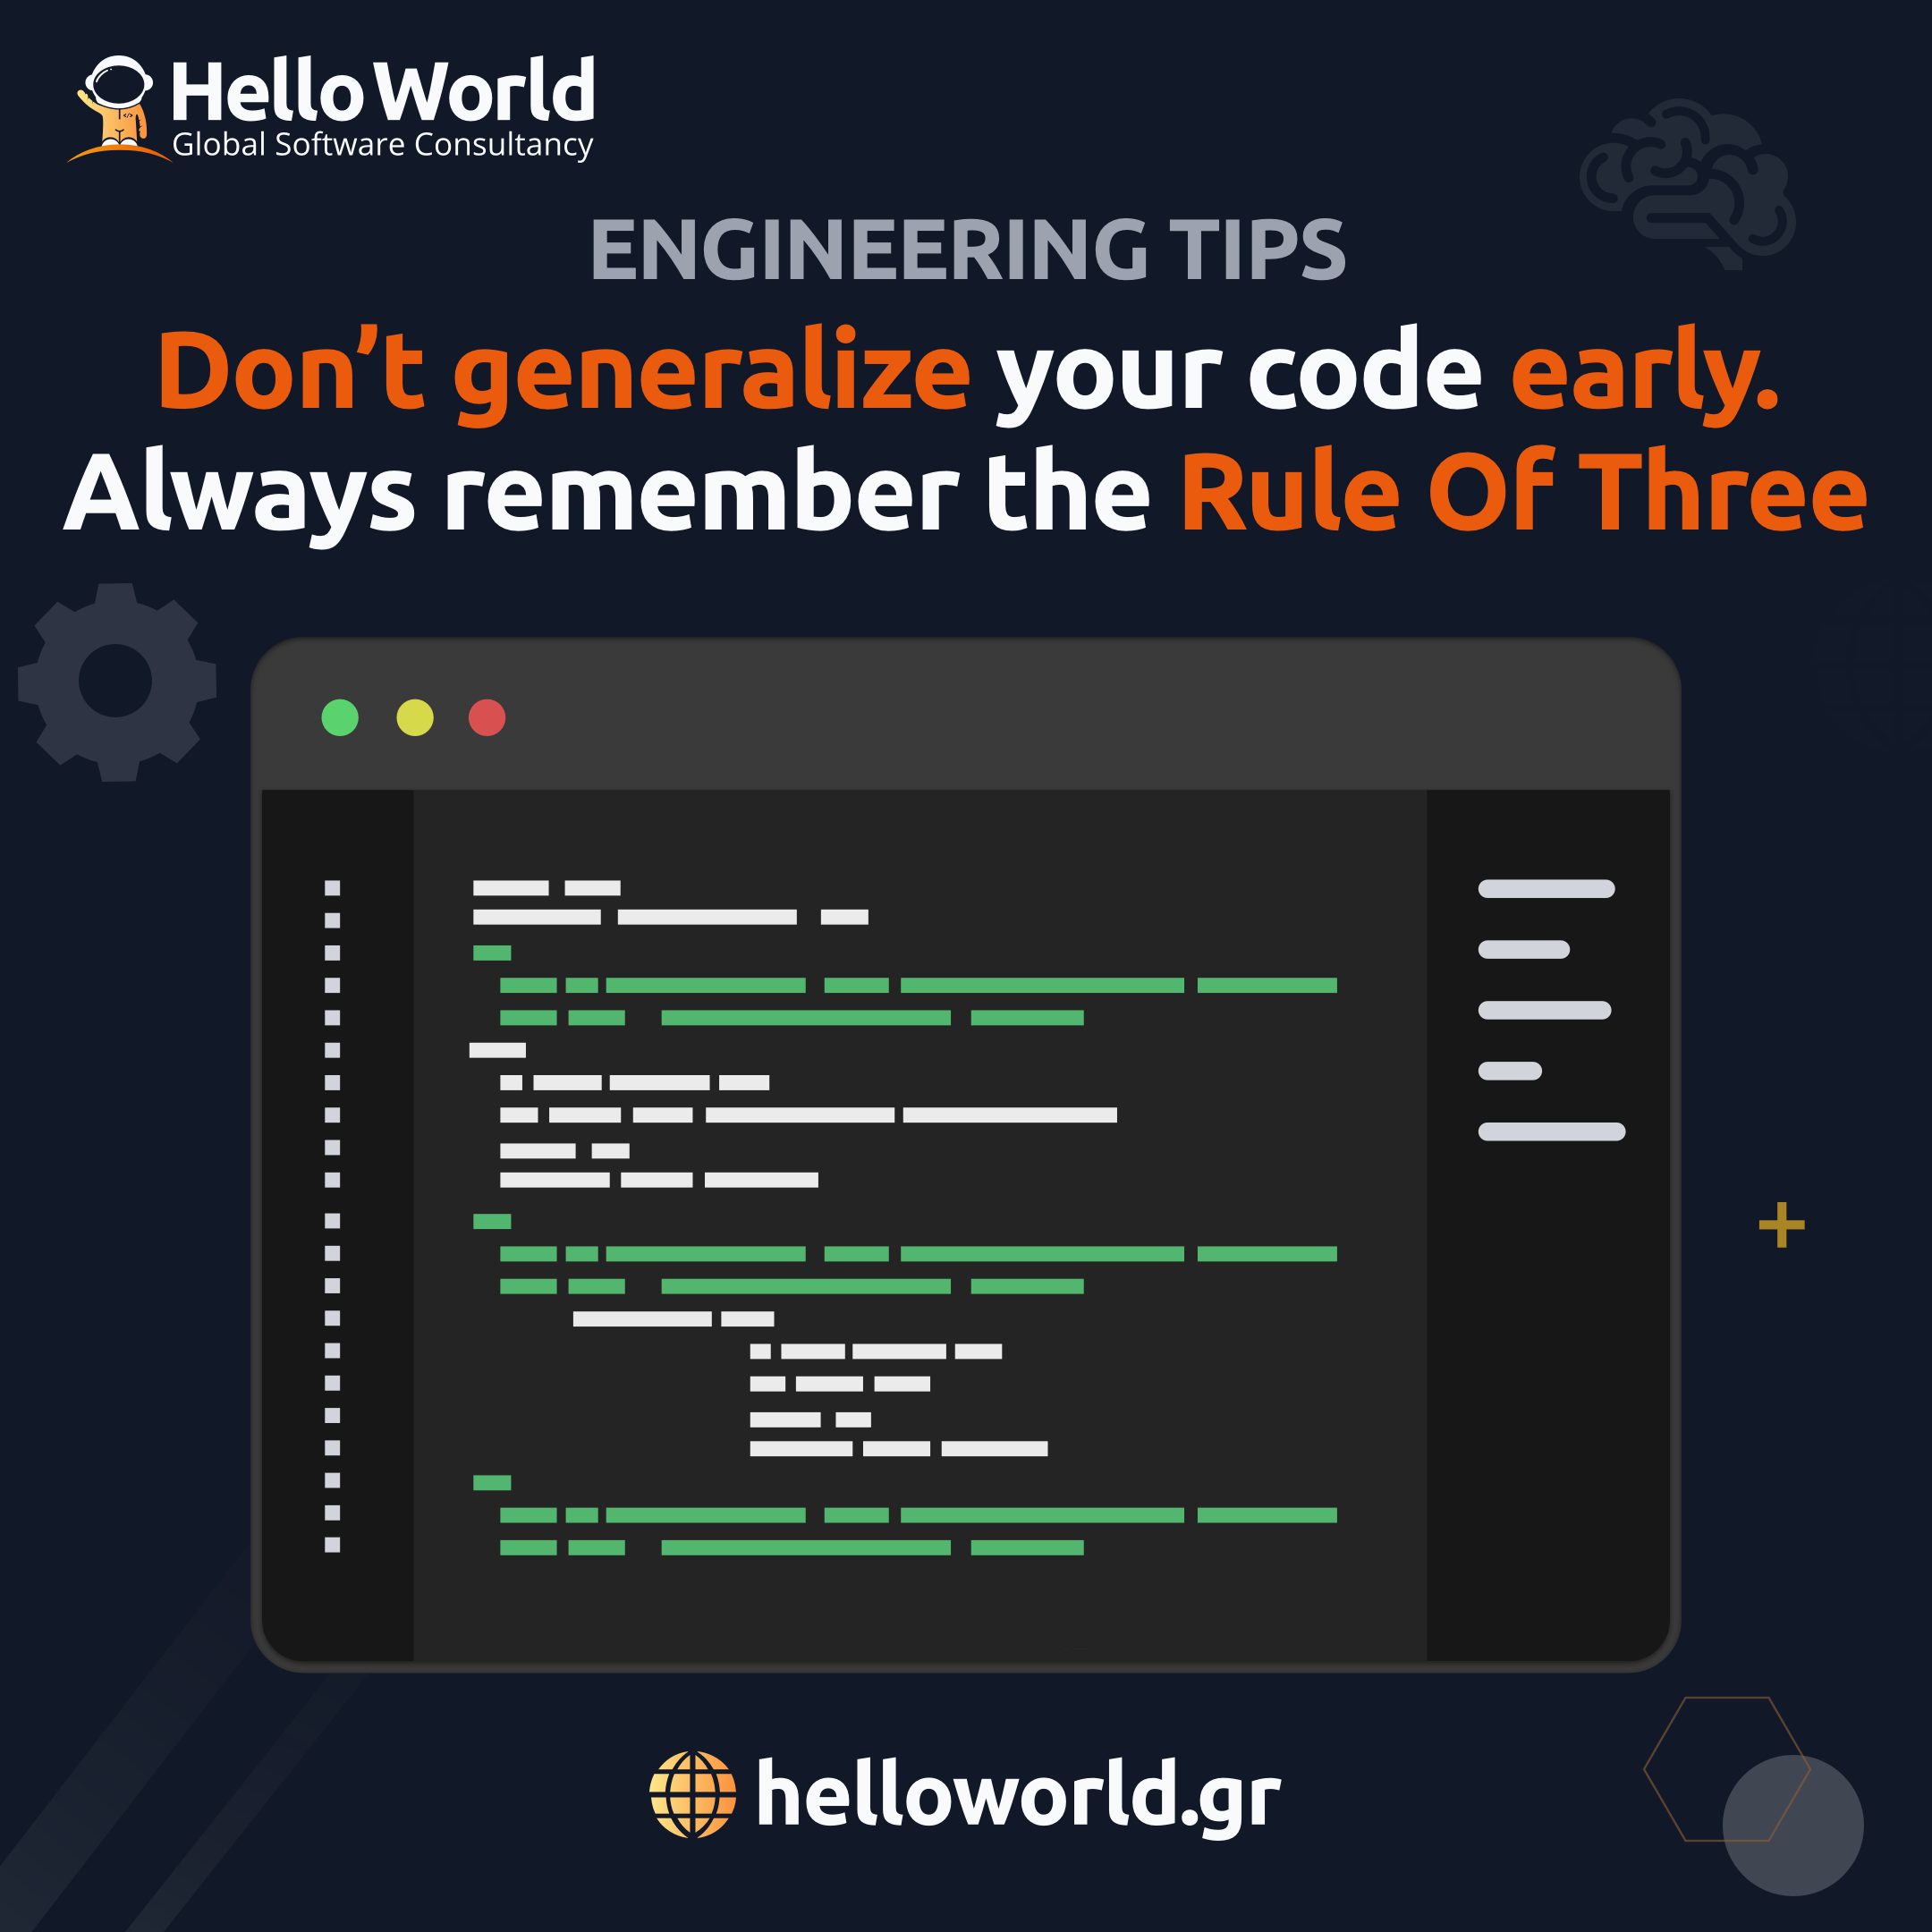 Avoid premature over-optimization of your code. Always remember the Rule Of Three